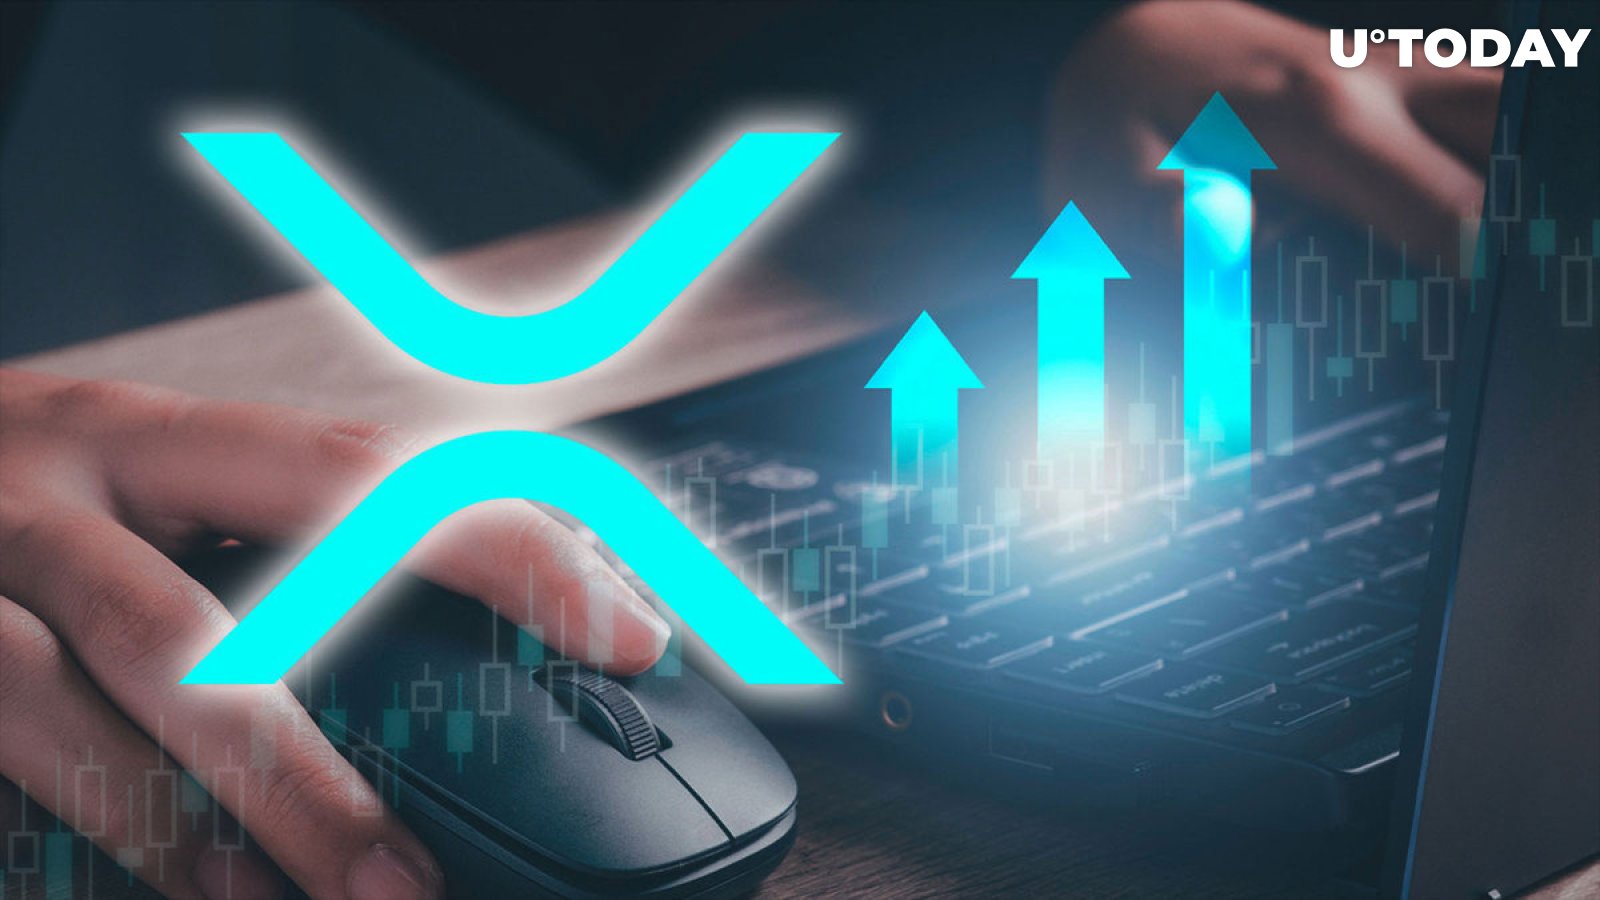 XRP Sees 112% Increase in Trading Volume as Token Stays Underbought per This Metric